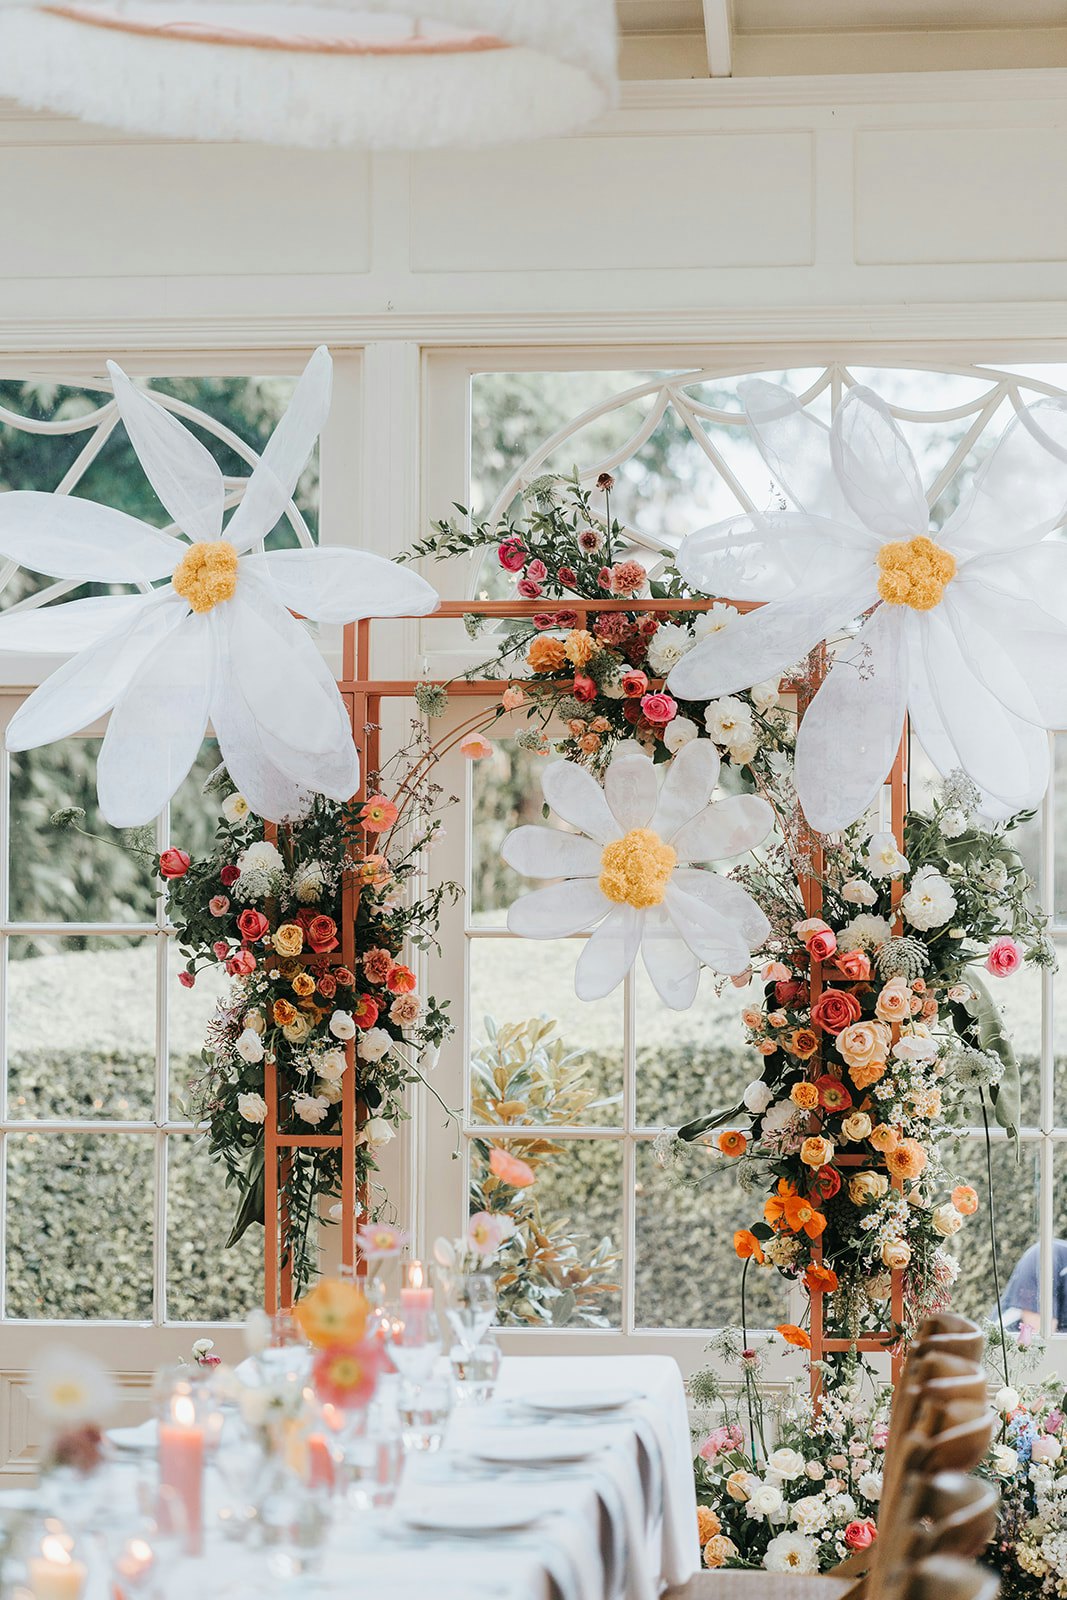 Flowers and arbour in wedding reception